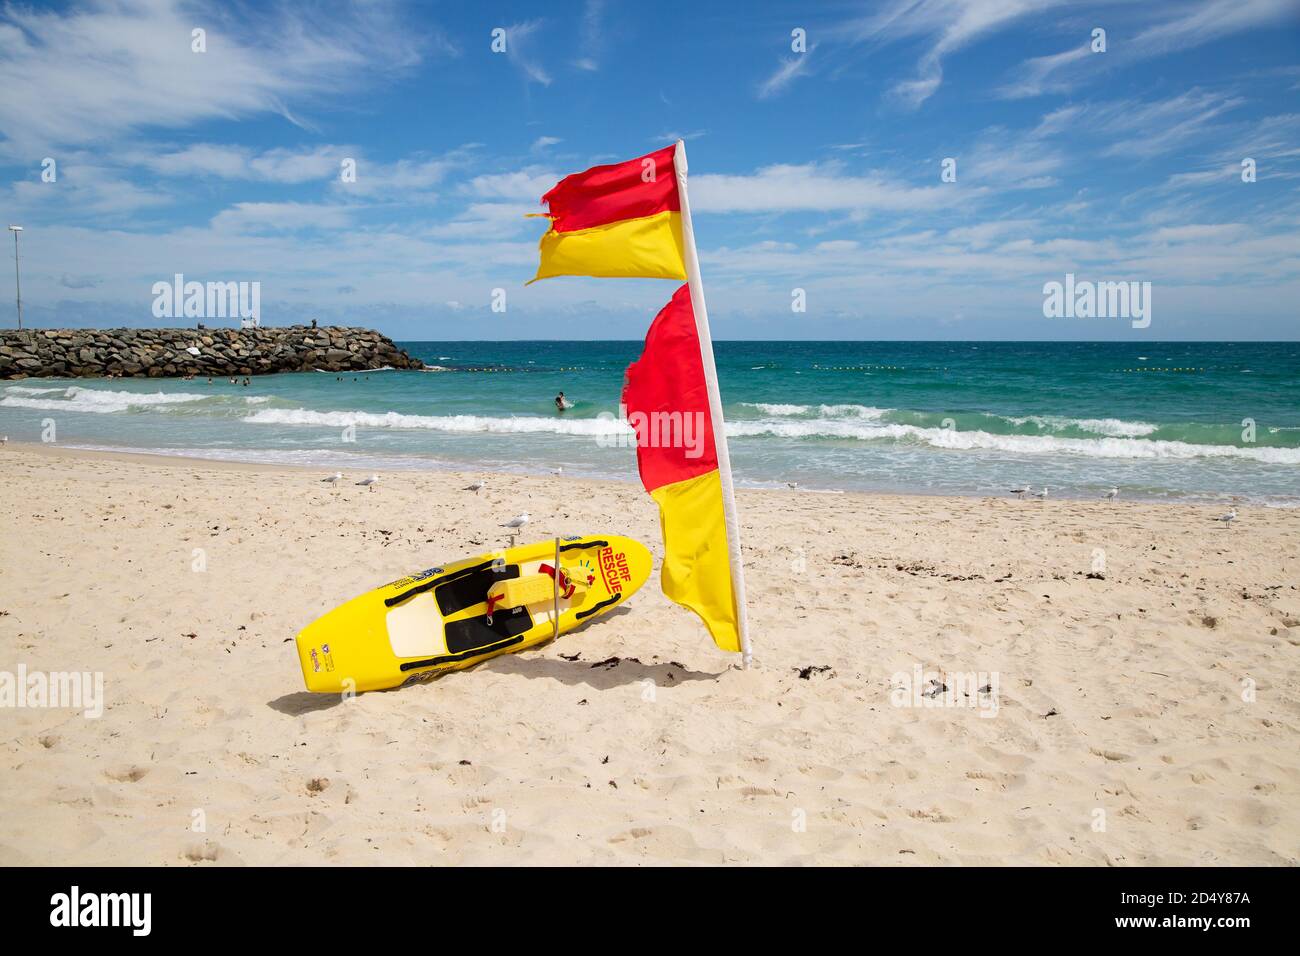 Perth, Australia - October 7th 2020: Surf lifesavers flag and board on the beach at Cottesloe with the ocean in the background Stock Photo